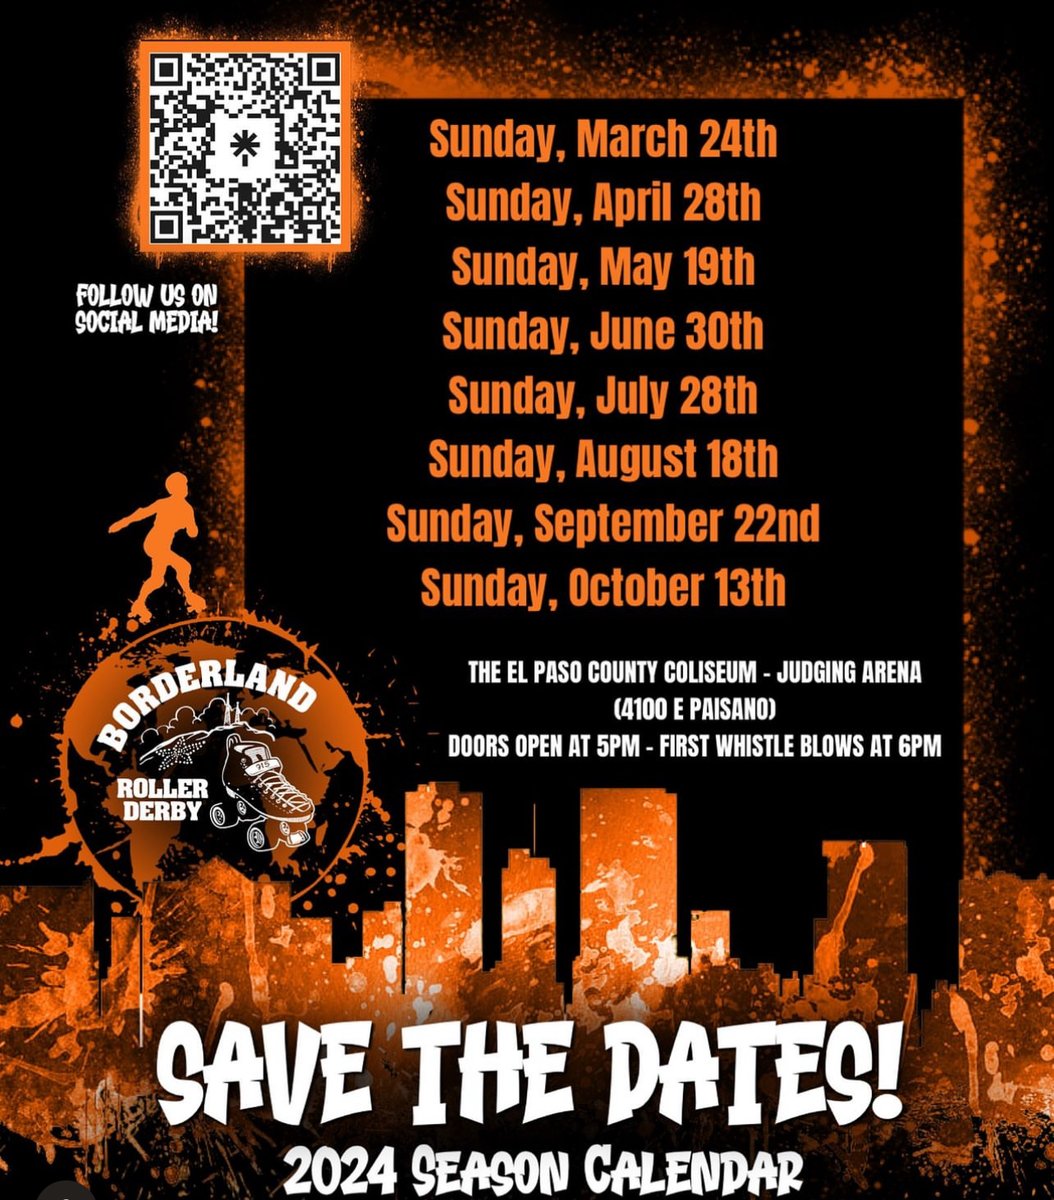 Borderland Roller Derby’s 2024 Season schedule The El Paso County Coliseum - Judging Arena Doors open at 5pm - First whistle blows at 6pm $7 Advanced/ $10 at the Door/ $7 Military ID/ $1 for Kids (10 and Under) • CASH ONLY • •RAFFLE PRIZES•GIVEAWAYS•FAMILY ENTERTAINMENT